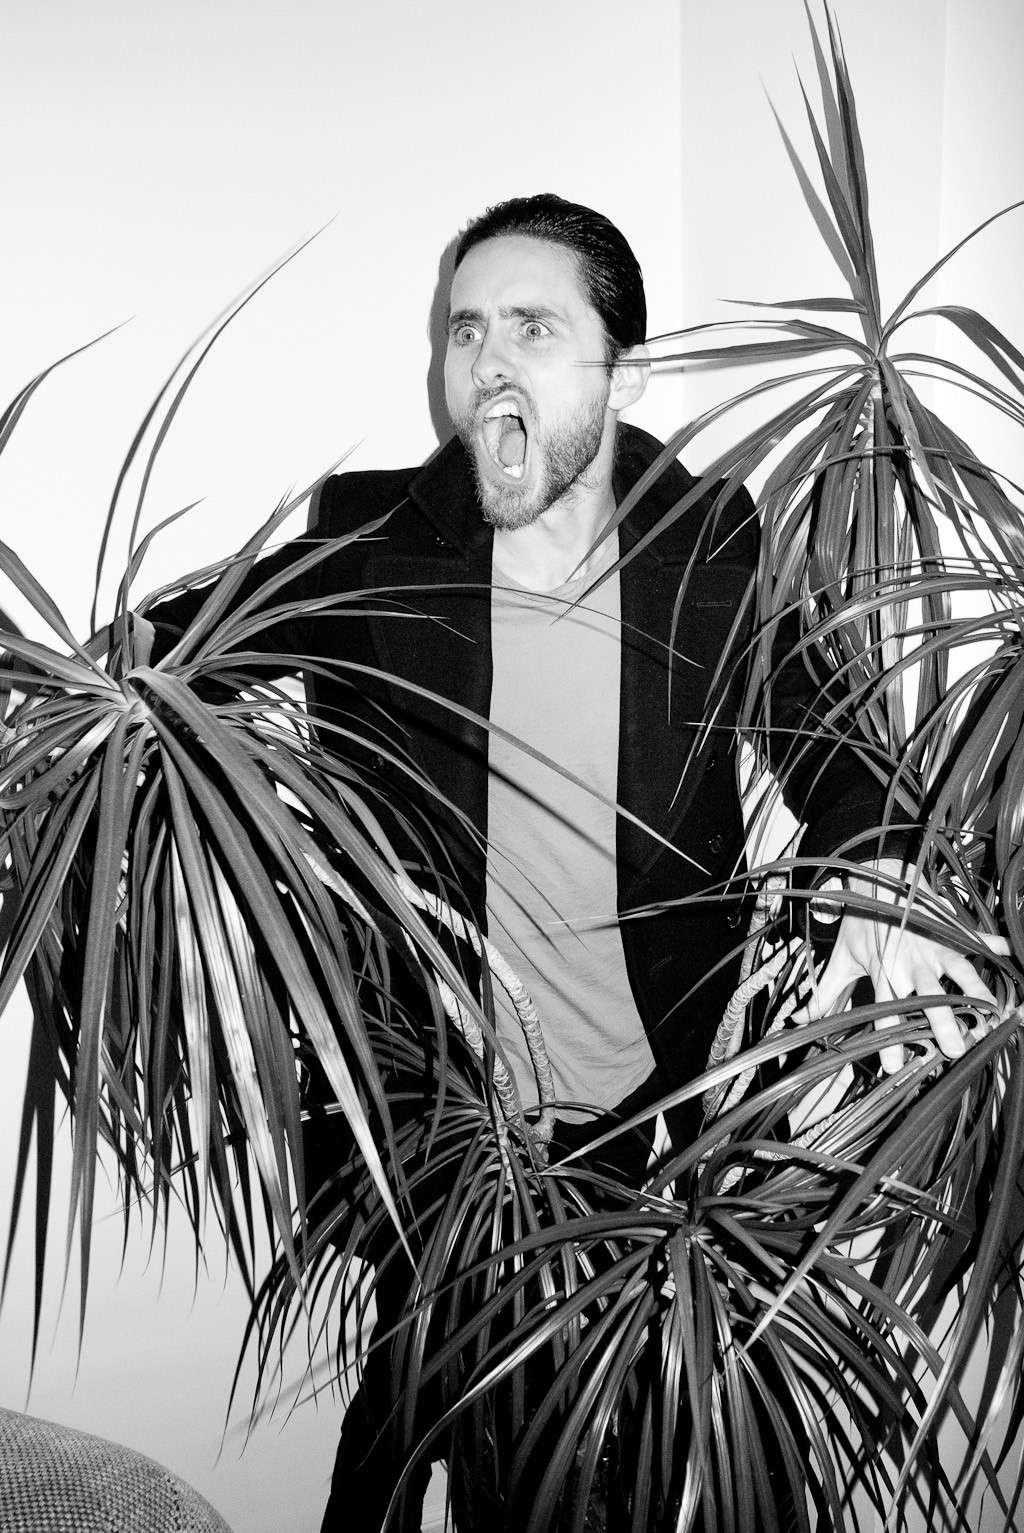 [PHOTOSHOOT] Jared Leto by Terry Richardson - Page 23 11_ric10